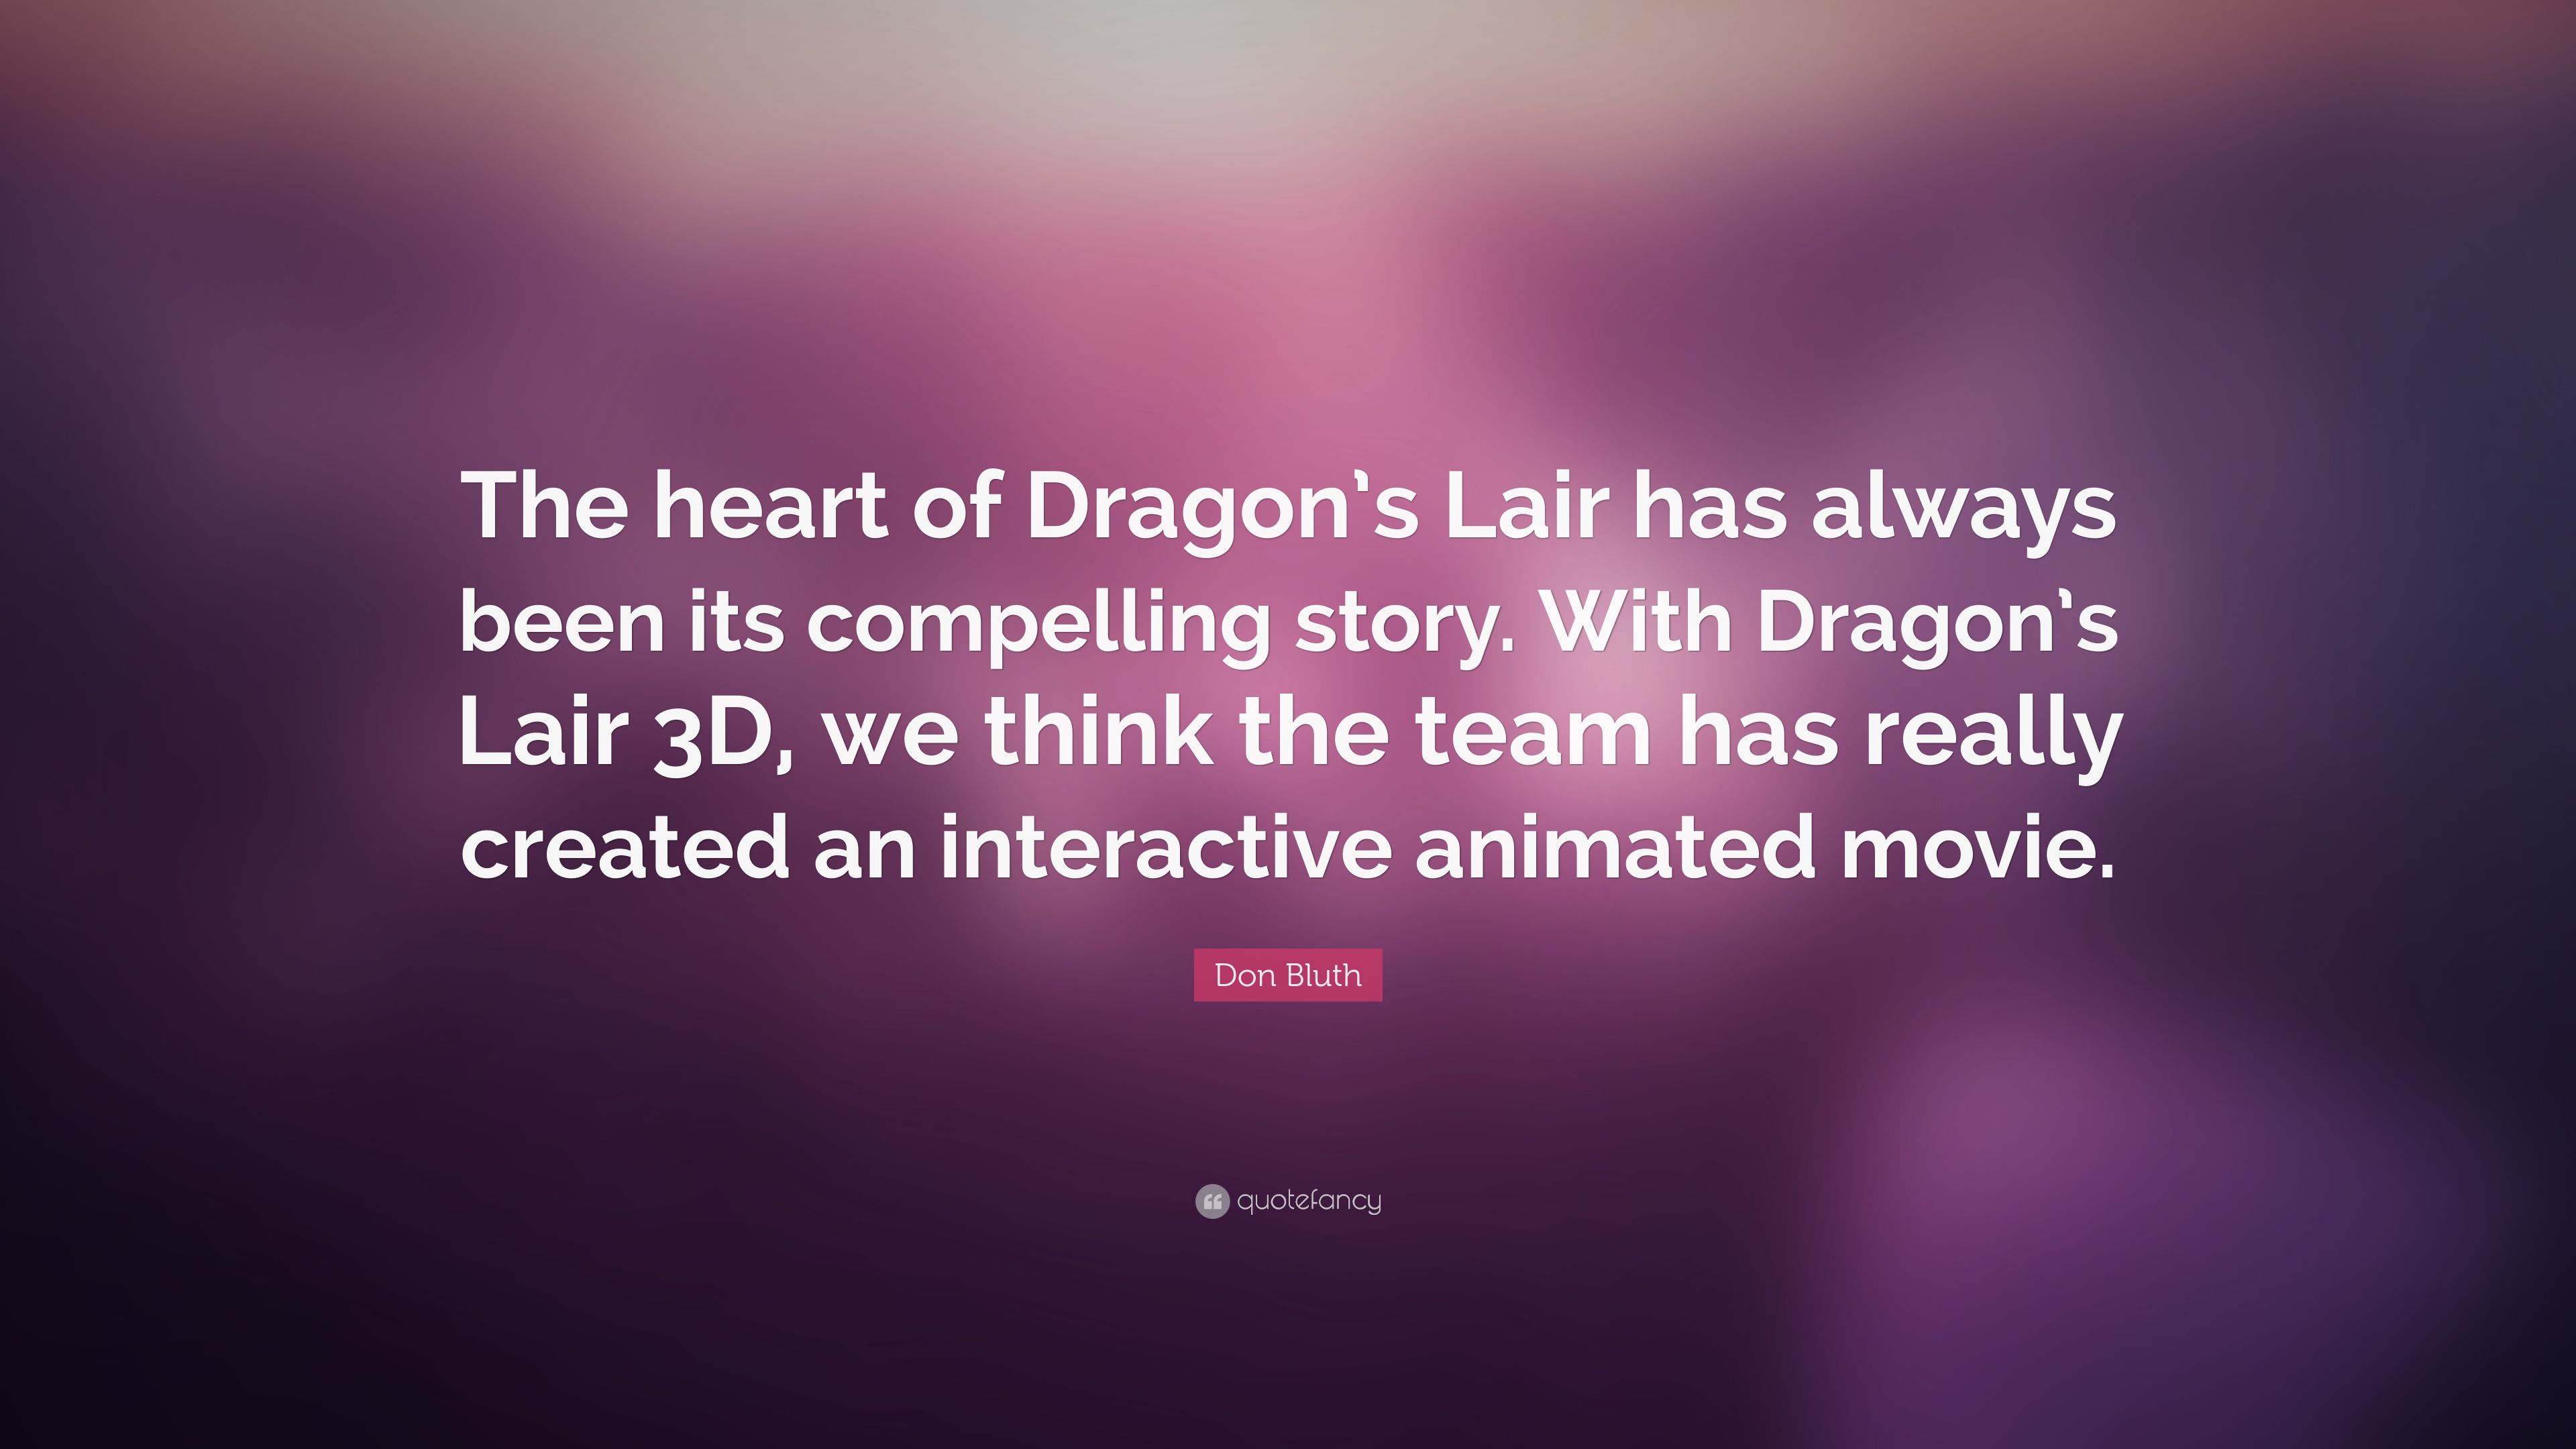 Don Bluth Quote: “The heart of Dragon's Lair has always been its